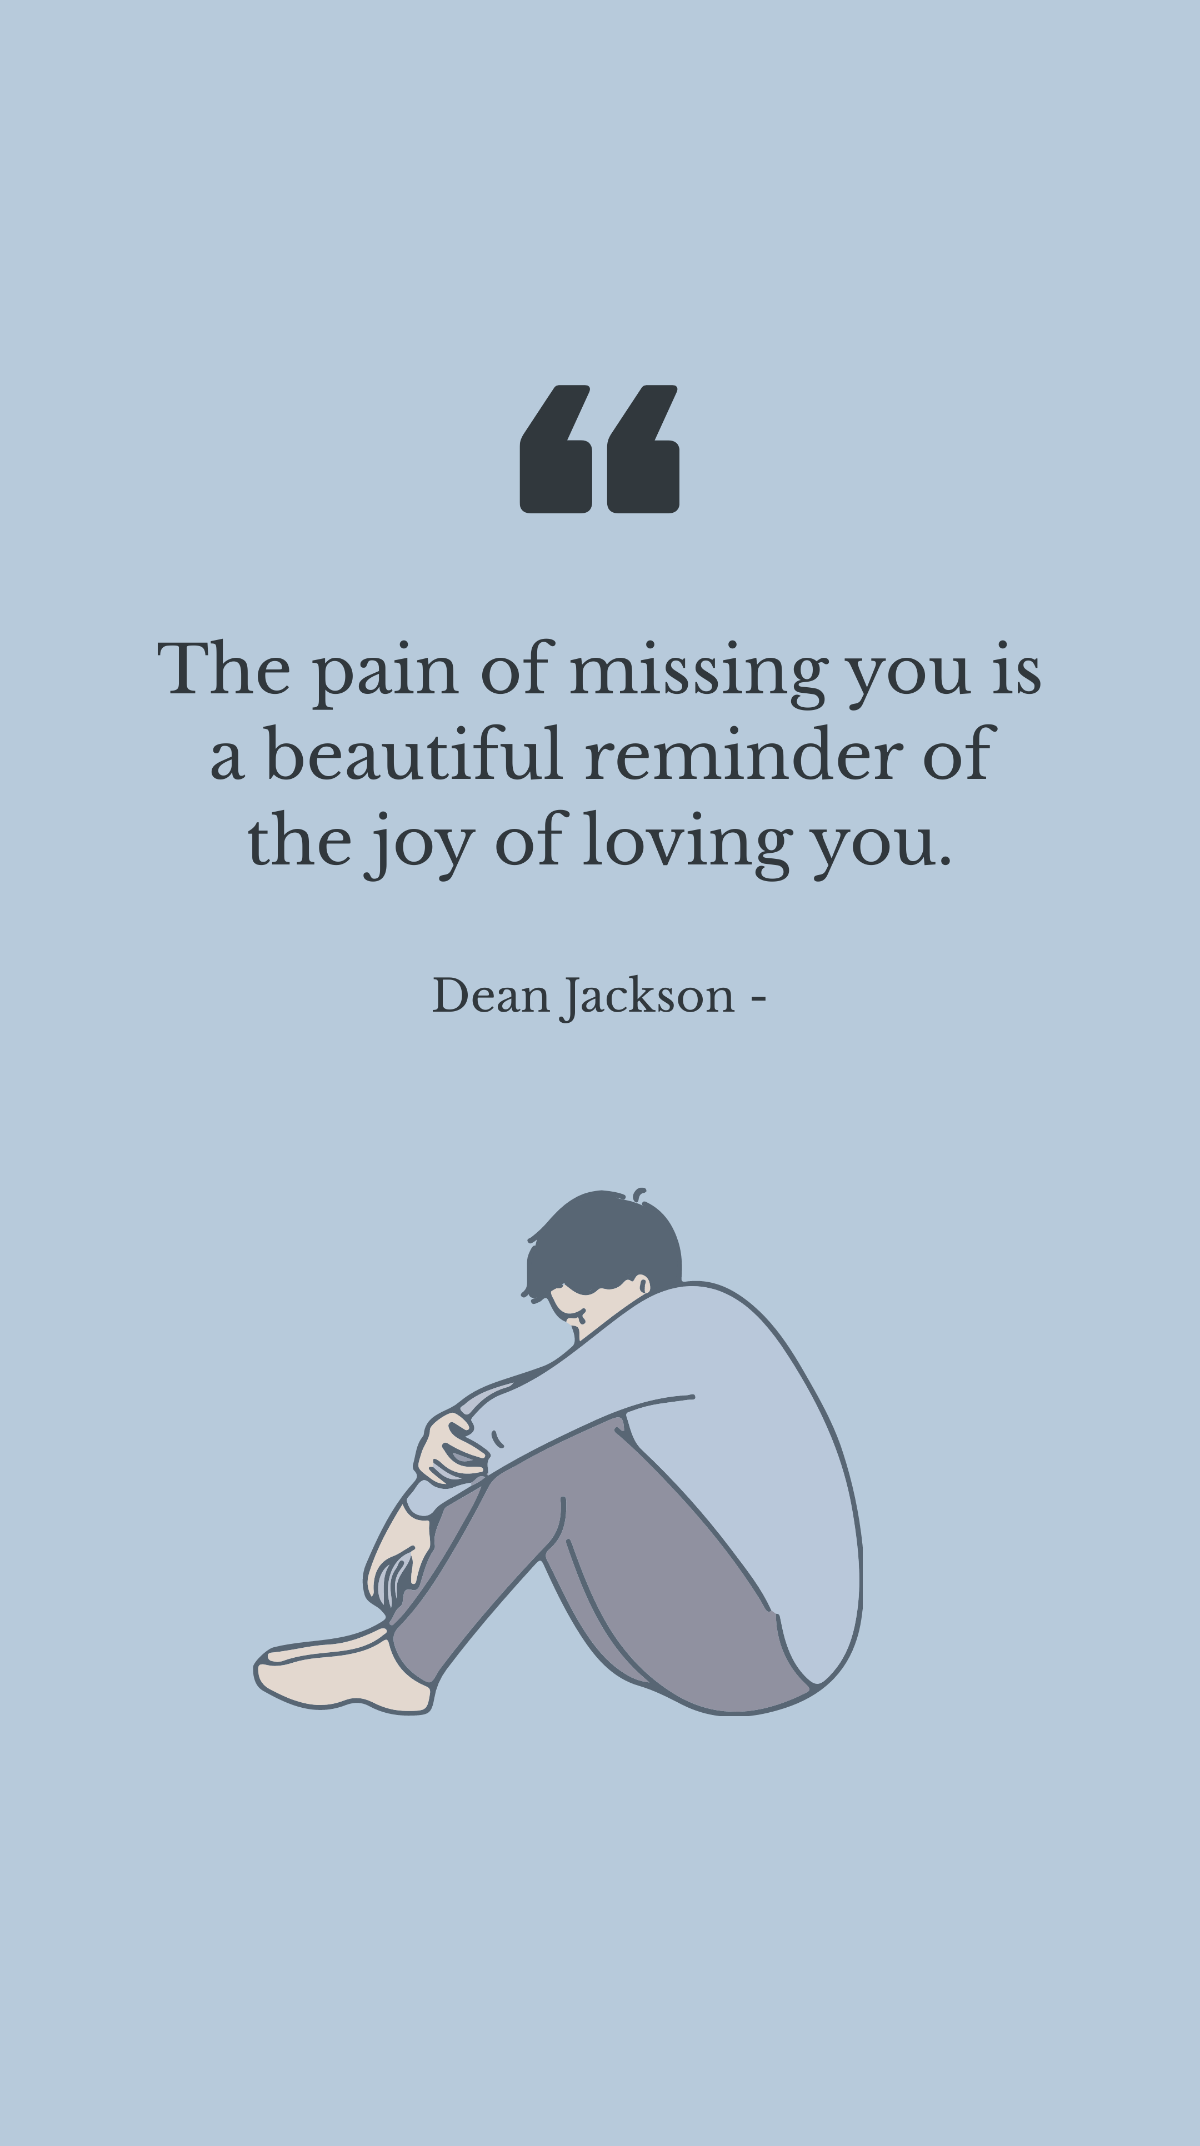 Dean Jackson - The pain of missing you is a beautiful reminder of the joy of loving you. Template